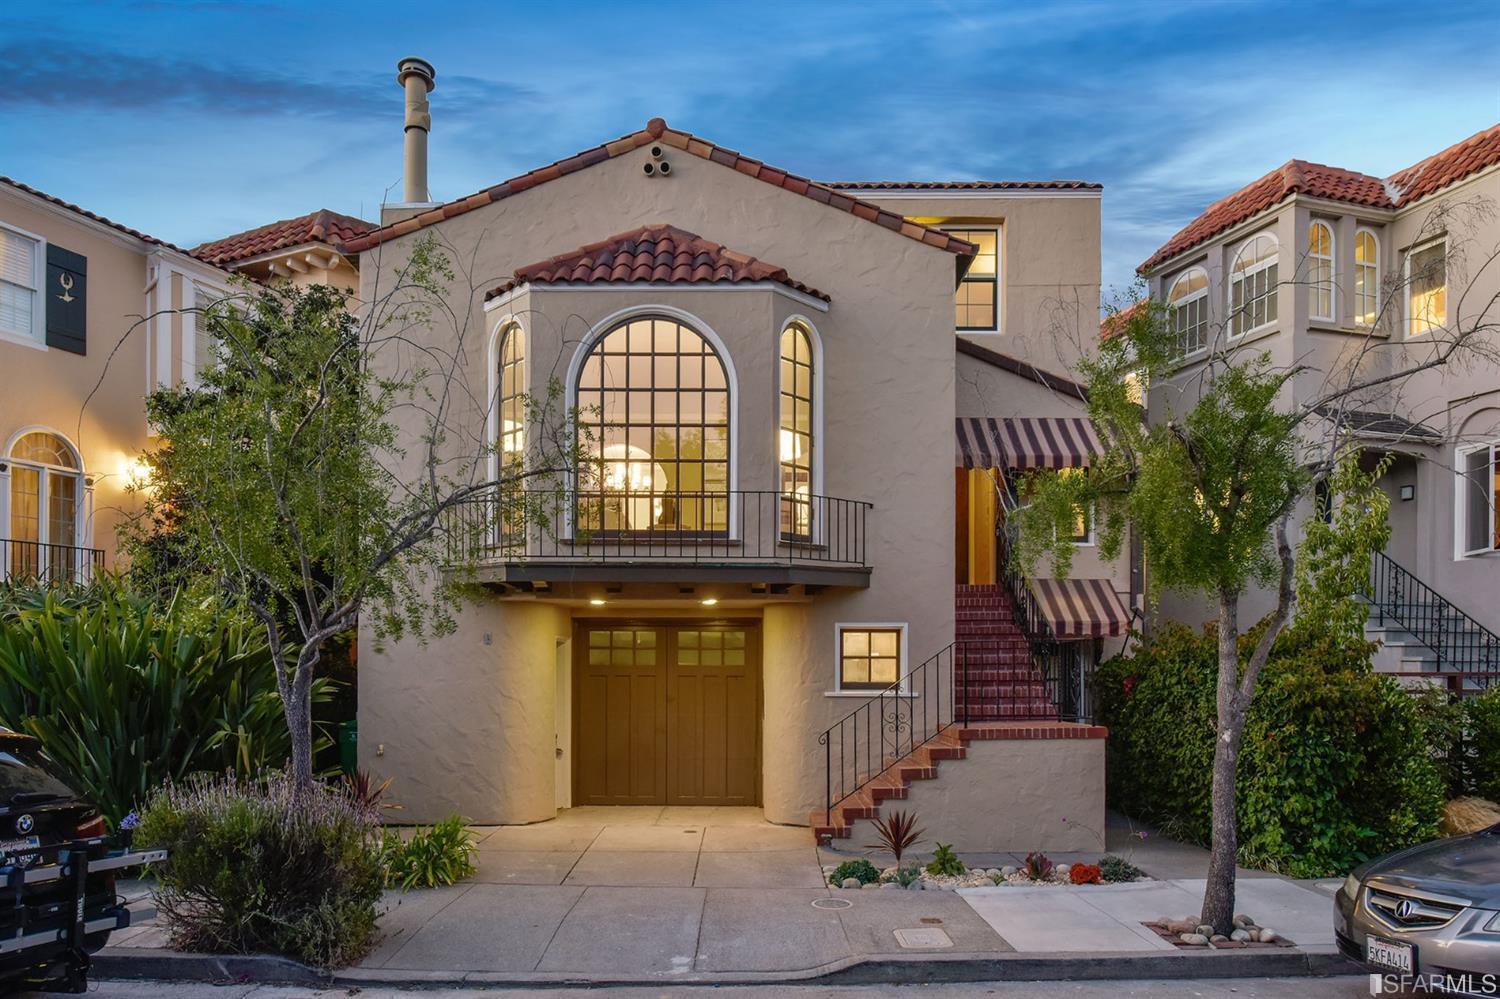 Overbids, $6MM Underbid, Pocket Listings, And Everything You Need For A Friday…